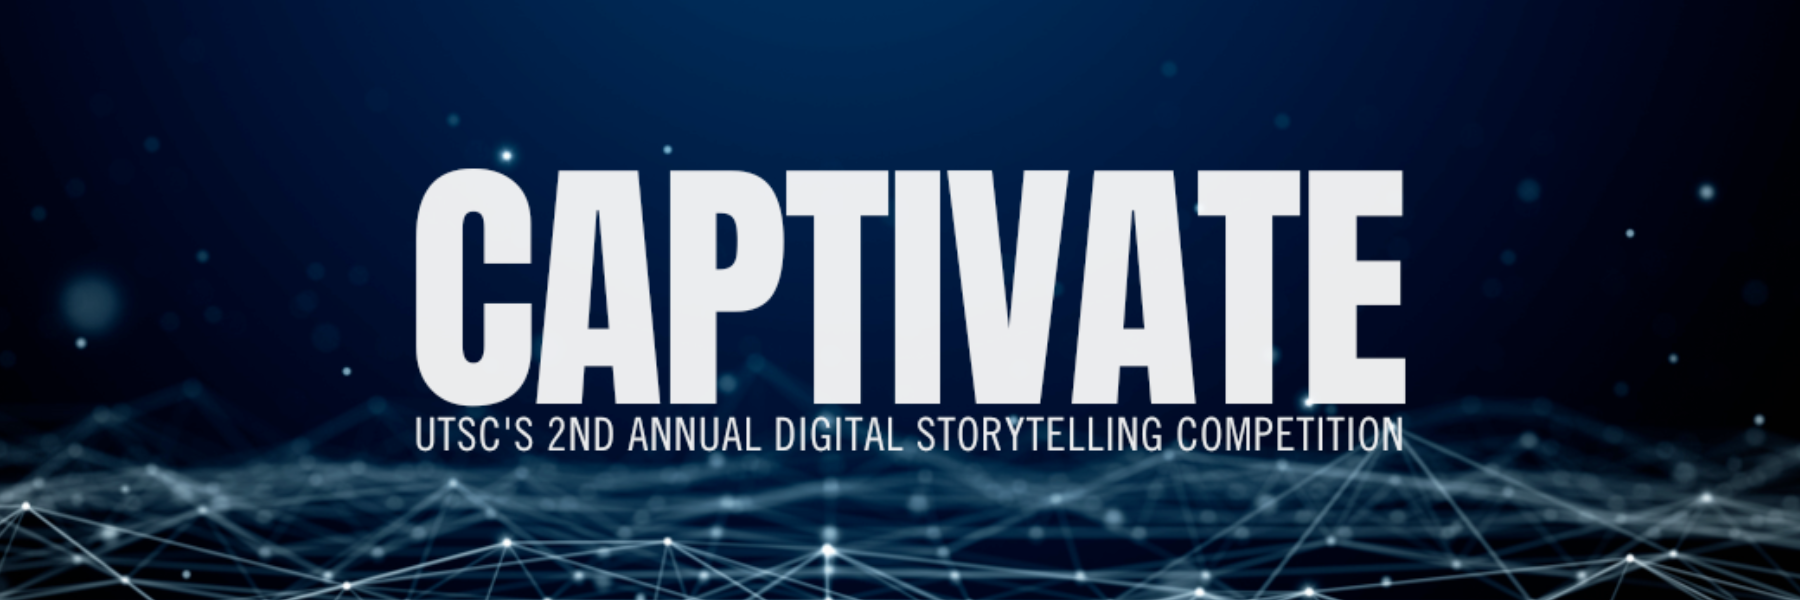 a banner saying captivate, UTSC's 2nd annual digital storytelling competition